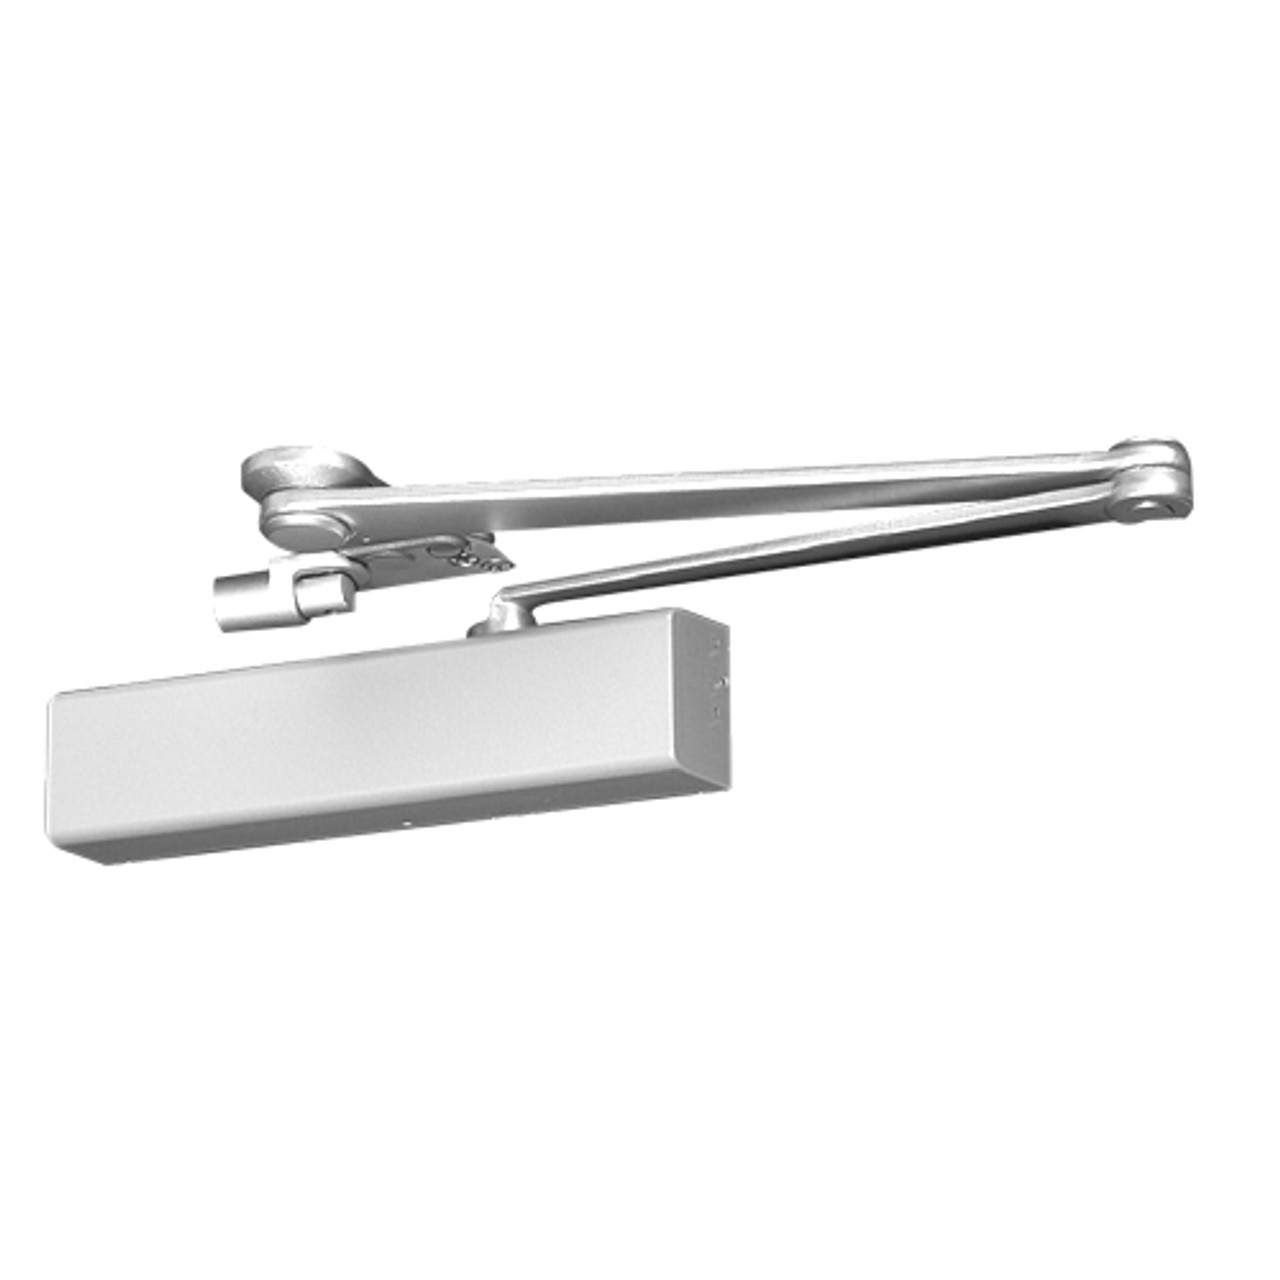 CPS8501A-689 Norton 8000 Series Full Cover Non-Hold Open Door Closers with CloserPlus Spring Arm in Aluminum Finish